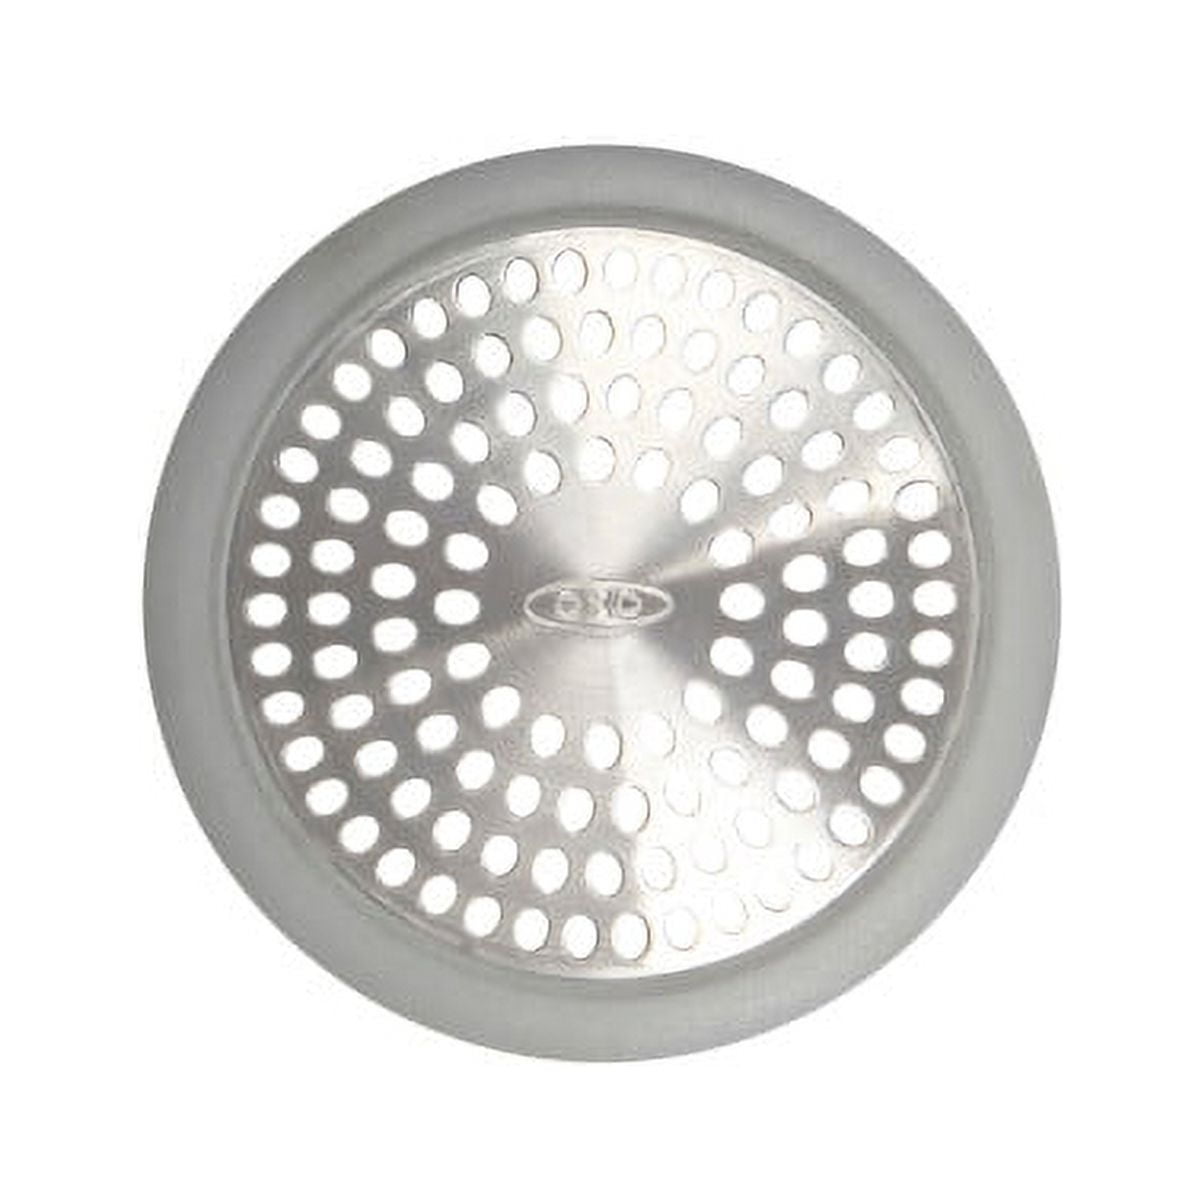 OXO, Good Grips Silicone Shower & Tub Drain Protector